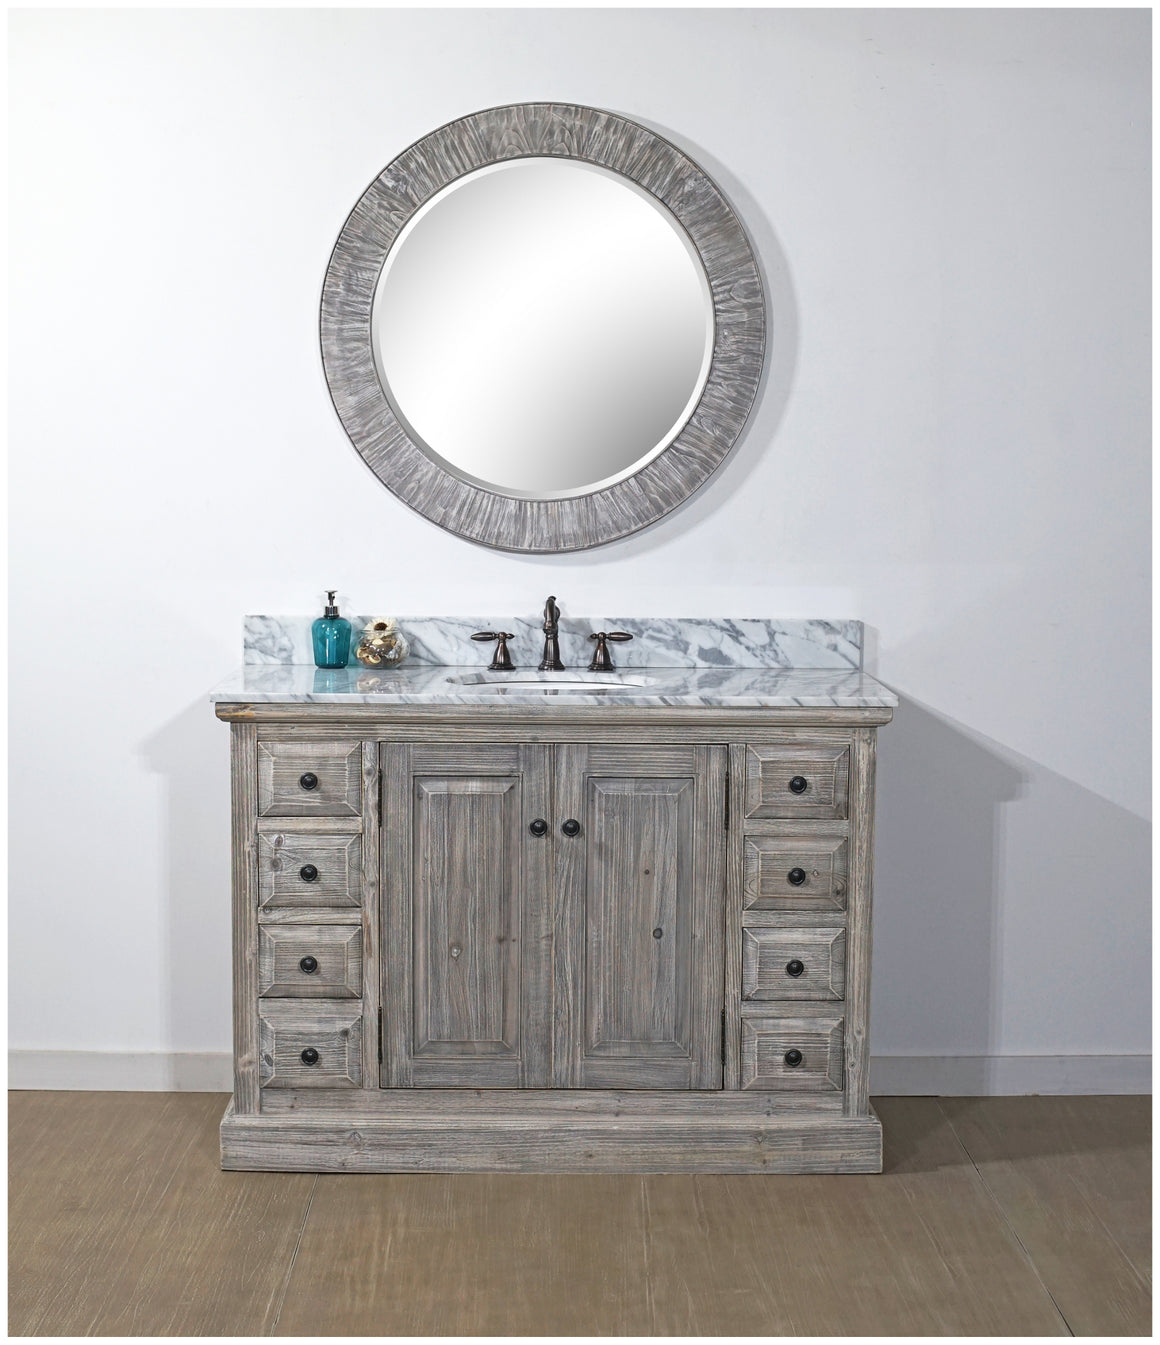 48" RUSTIC SOLID FIR SINGLE SINK VANITY IN GREY-DRIFTWOOD WITH CARRARA WHITE MARBLE TOP-NO FAUCET